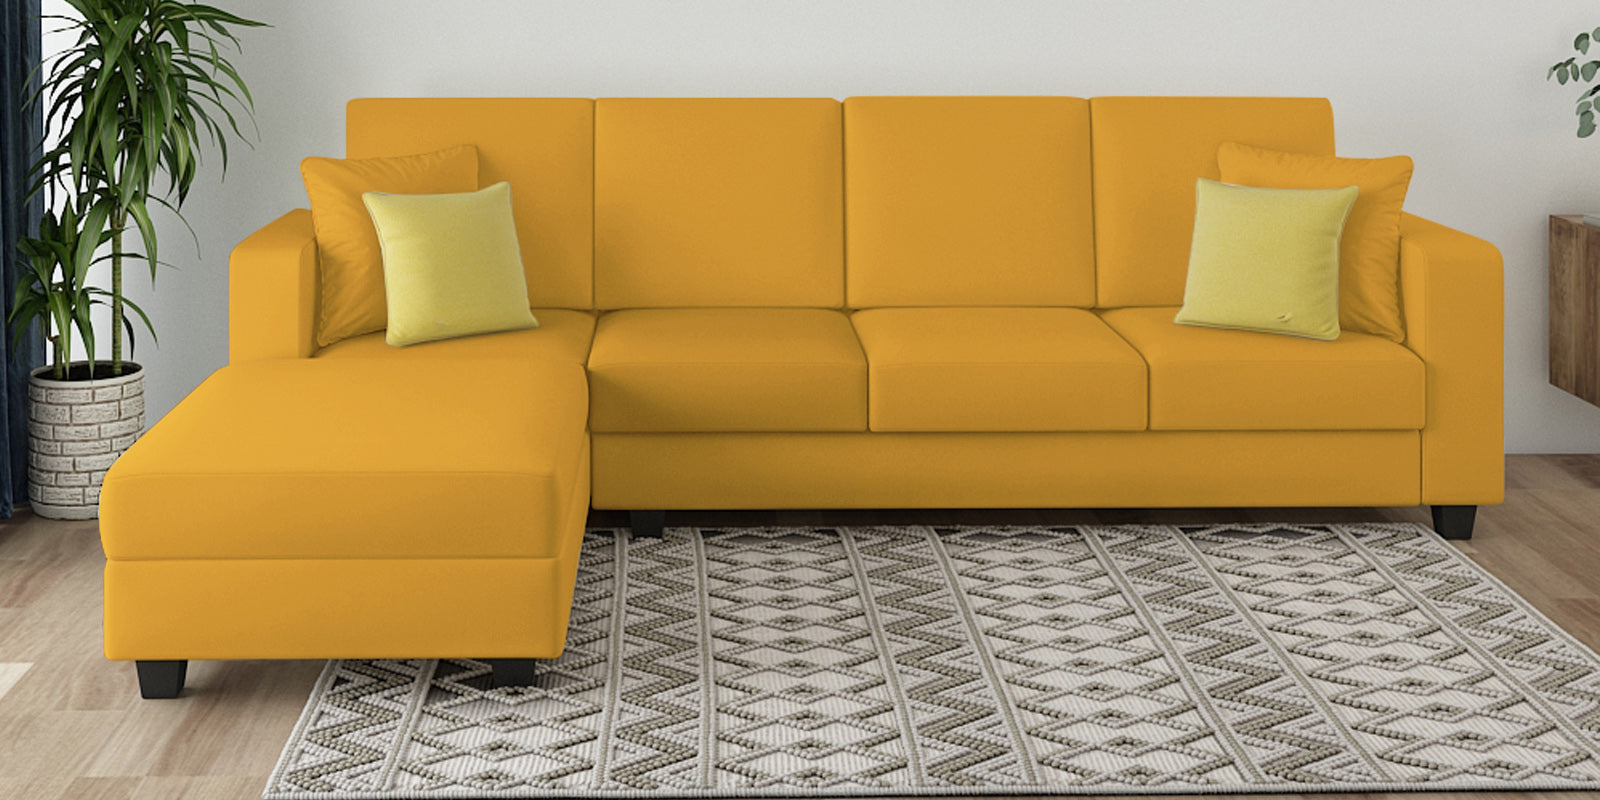 Nabi Fabric RHS Sectional Sofa (3 + Lounger) In Bold Yellow Colour